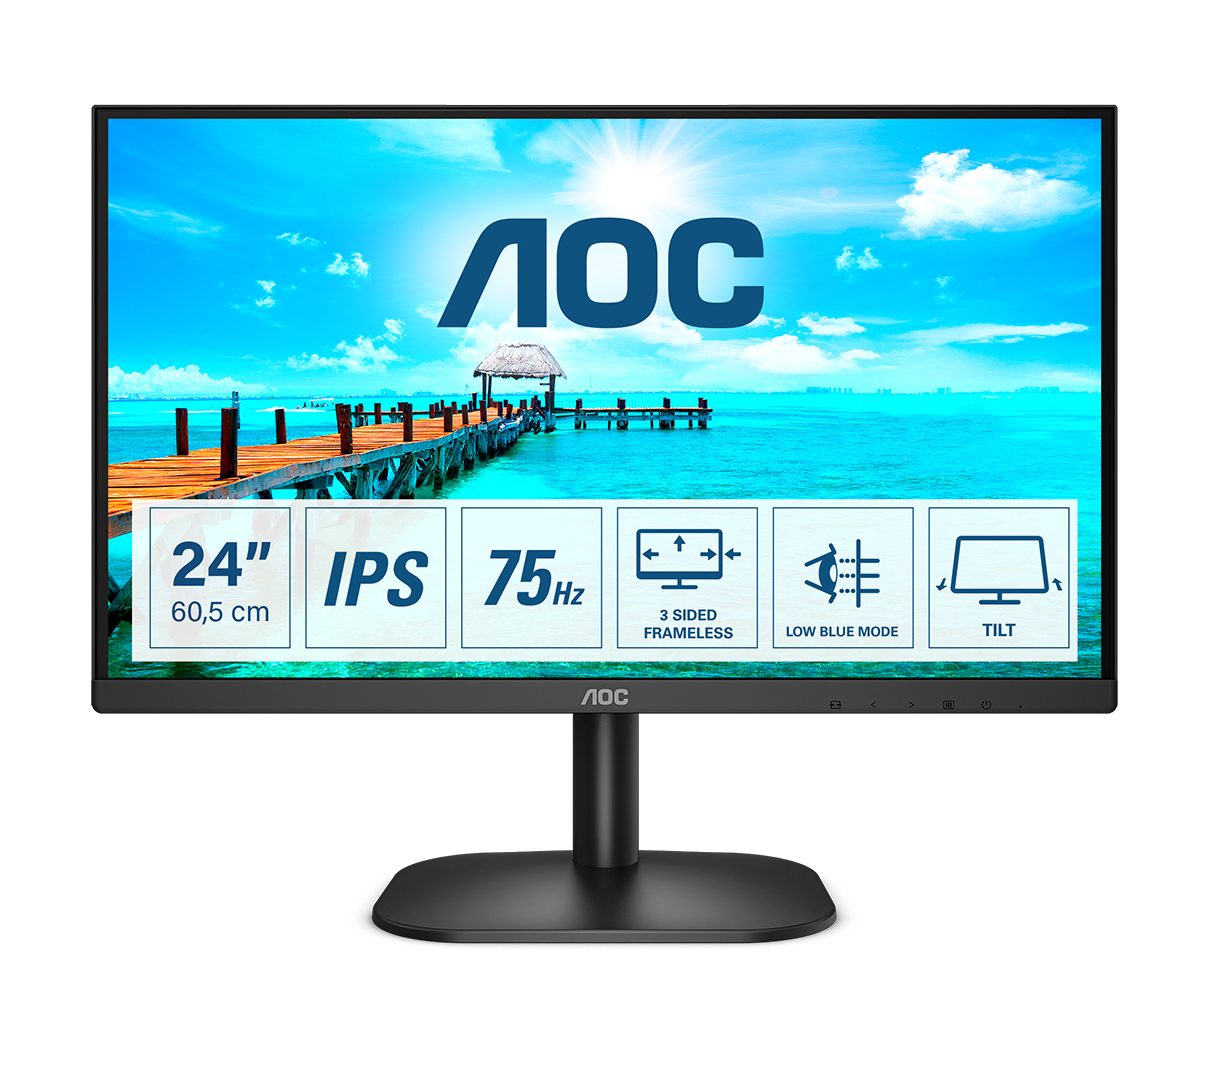 Screen size (inch) 23.8, Panel resolution 1920x1080, Refresh rate 75 Hz, Panel type IPS, HDMI HDMI 1.4 x 1, D-SUB (VGA) 1x